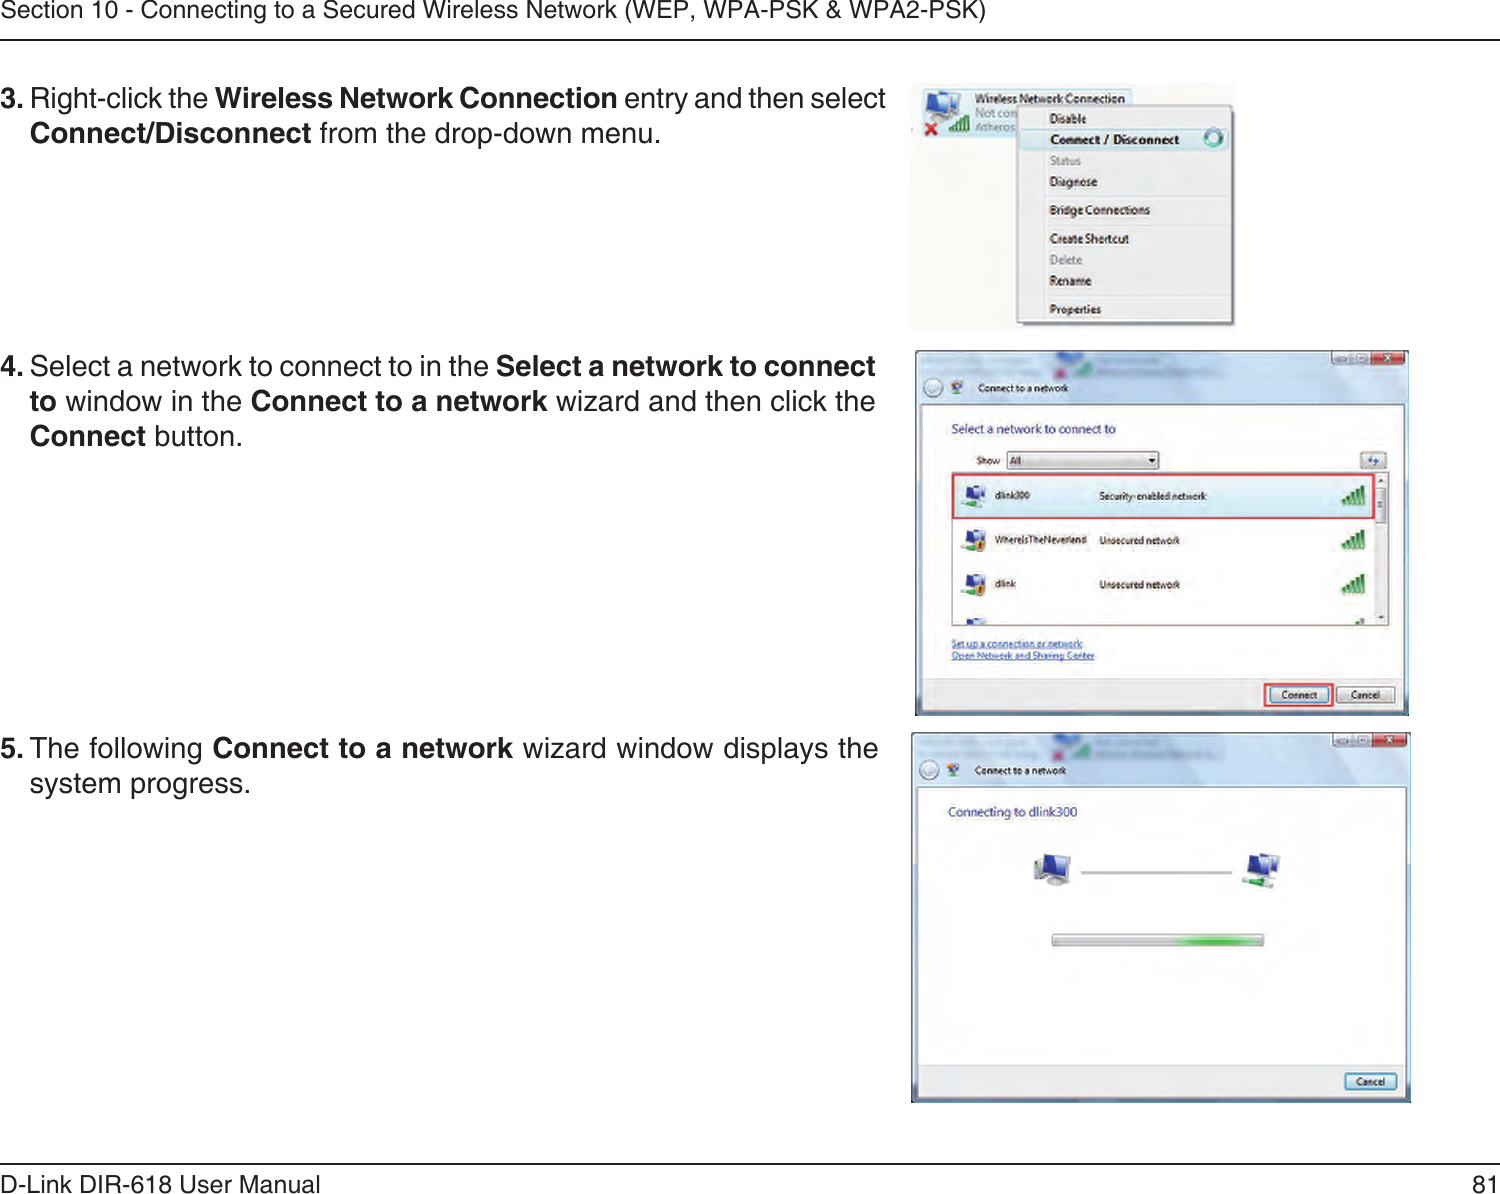 81D-Link DIR-618 User ManualSection 10 - Connecting to a Secured Wireless Network (WEP, WPA-PSK &amp; WPA2-PSK)4. Select a network to connect to in the Select a network to connectto window in the Connect to a network wizard and then click theConnect button. 5. The following Connect to a network wizard window displays thesystem progress. 3. Right-click the Wireless Network Connection entry and then selectConnect/Disconnect from the drop-down menu. 